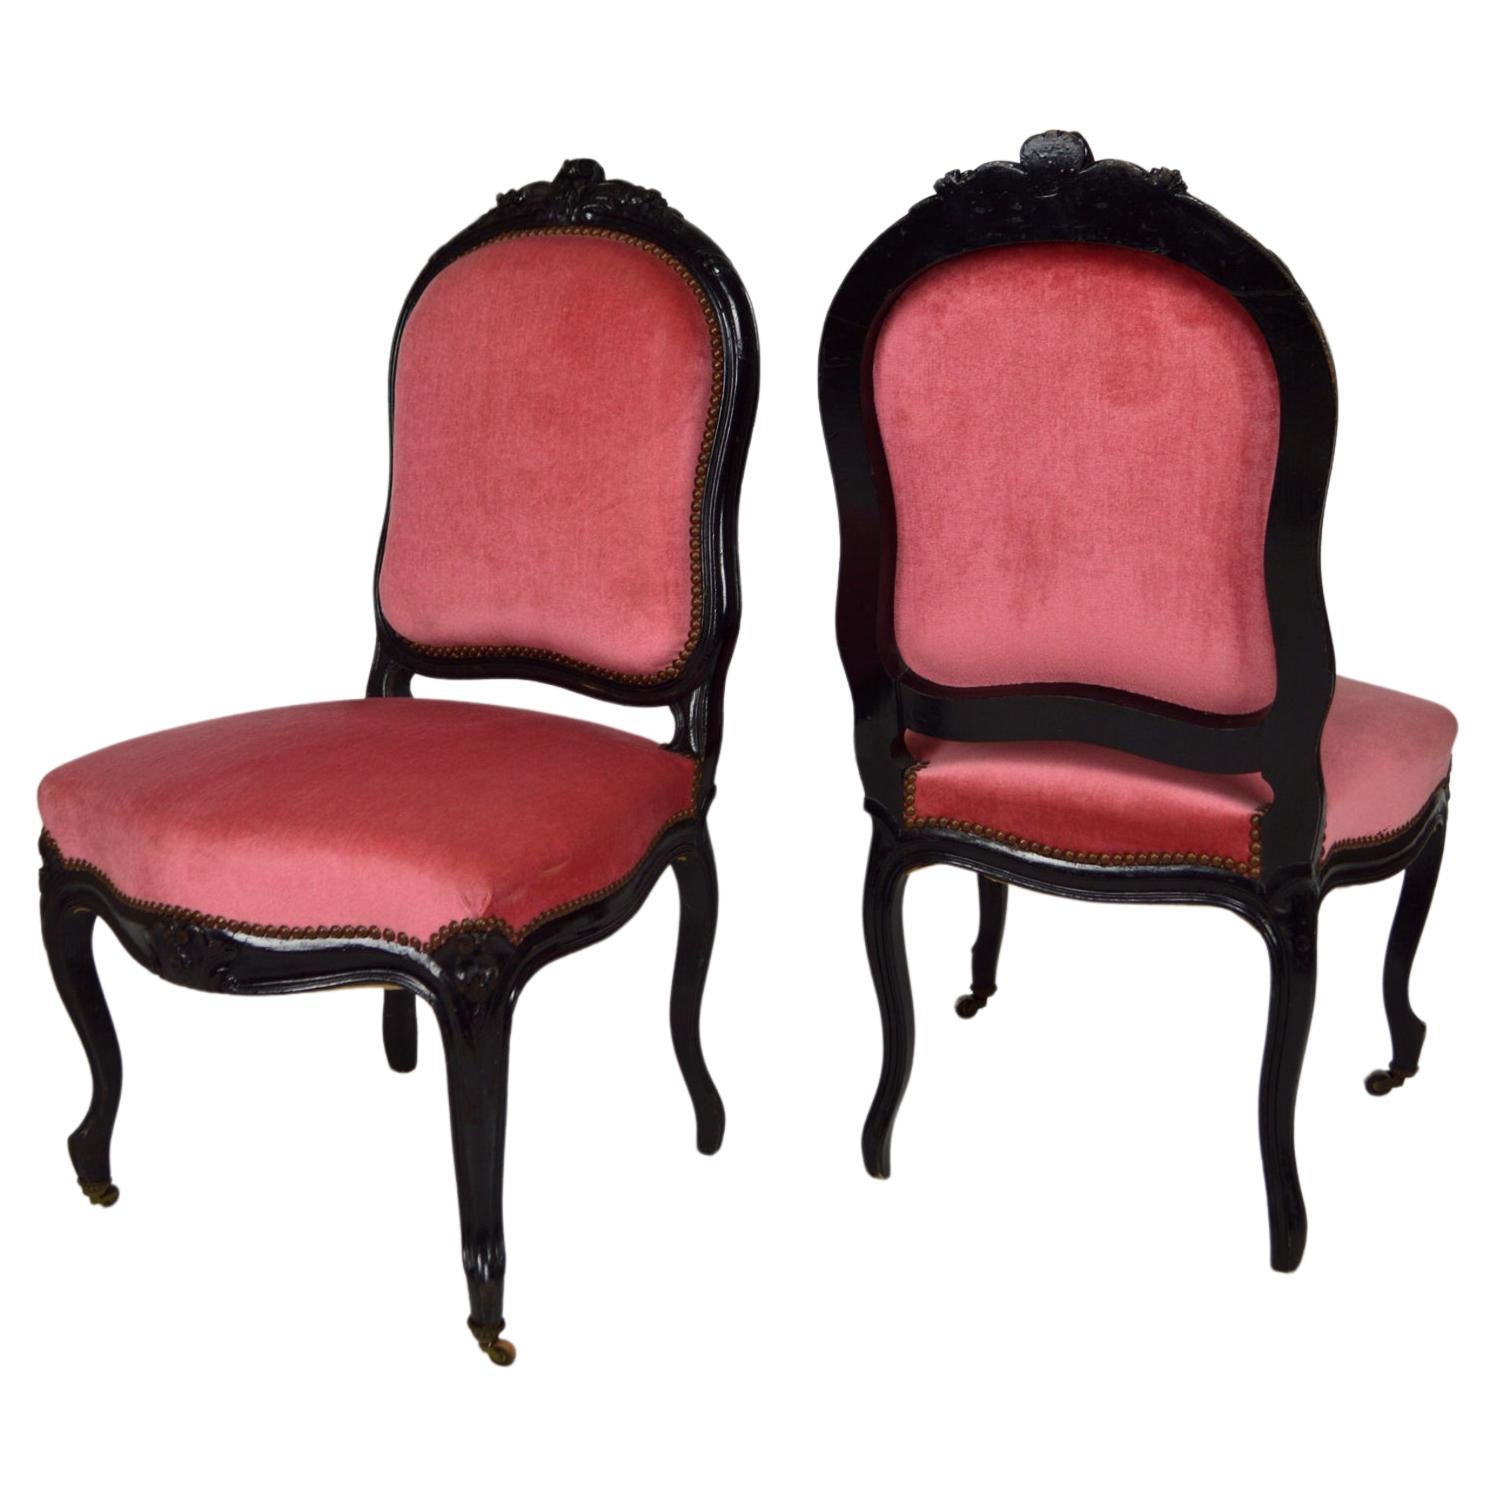 Napoleon III Chairs in Ebonized Wood and Pink Velvet, France, circa 1870